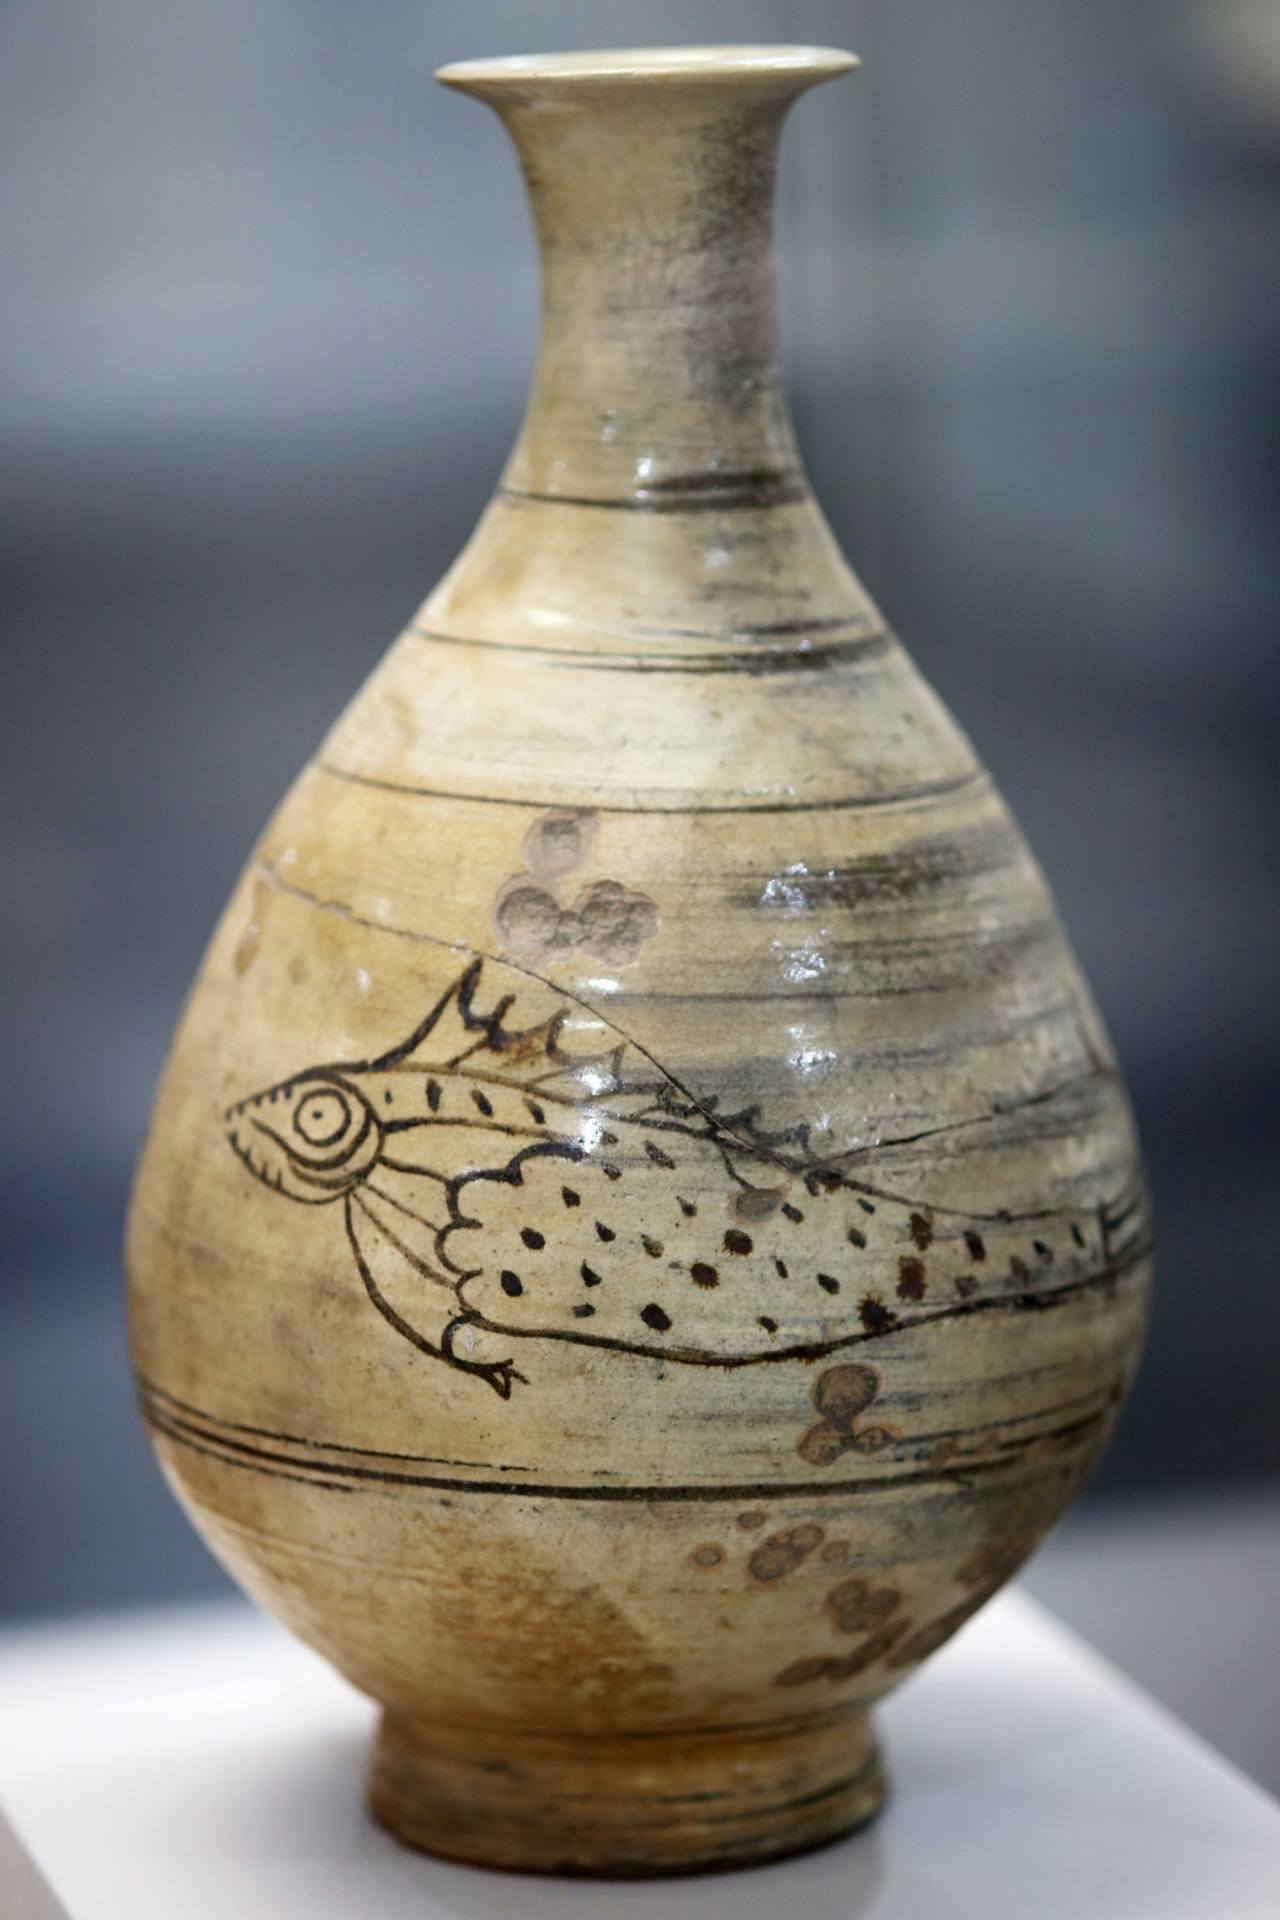 Joseon-period Buncheong ware bottle from Geumsa-ri, Buyeo is on display at the Buyeo National Museum of Korea. (Photo © Hyungwon Kang)